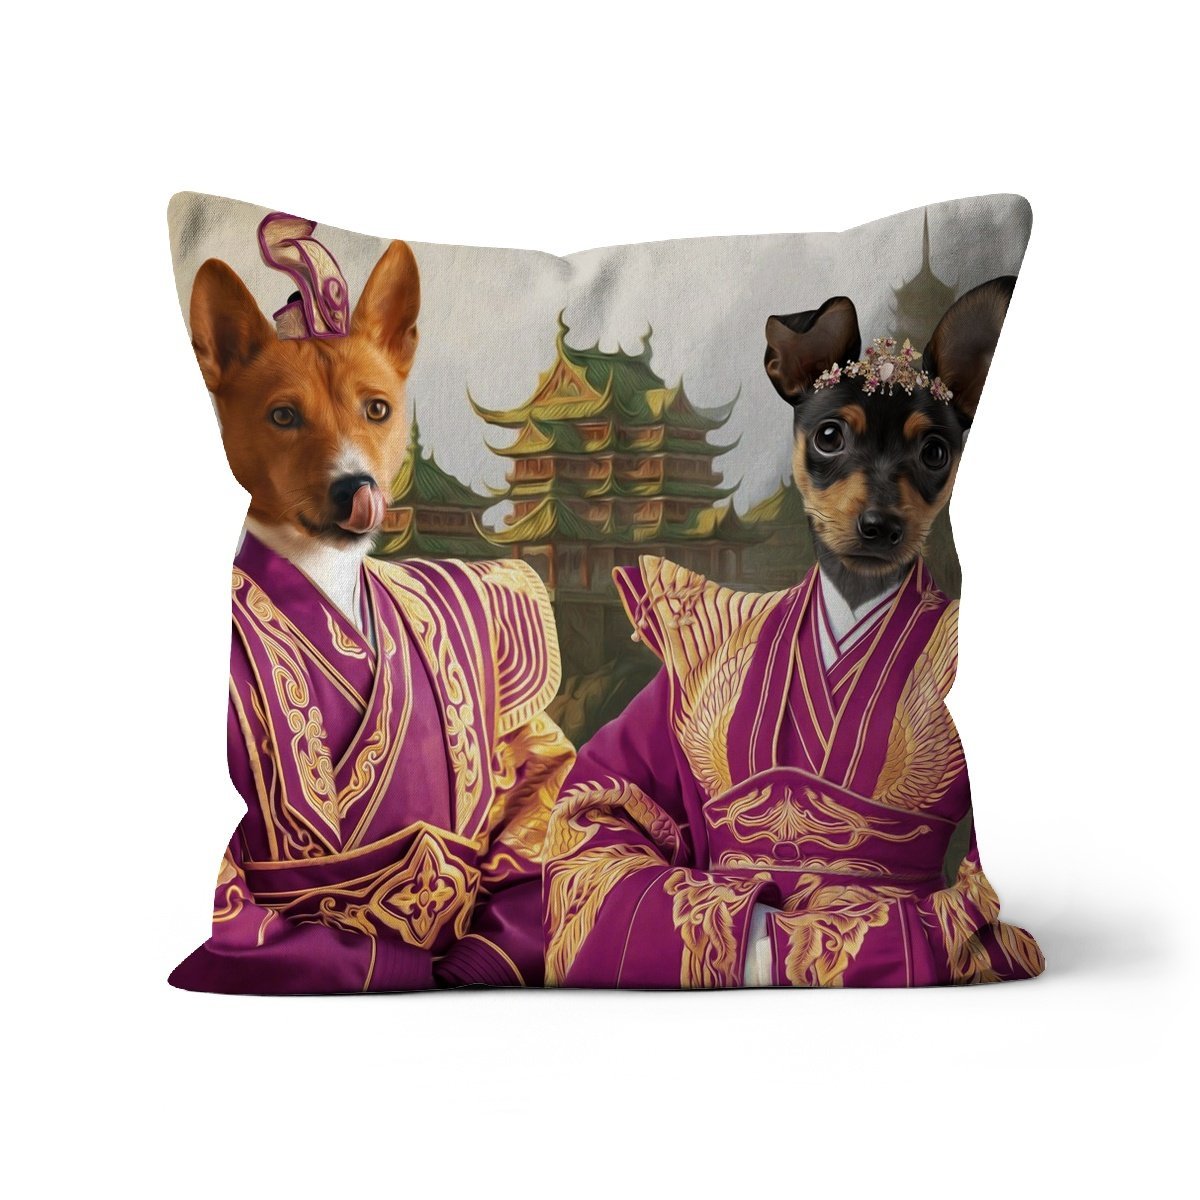 The Chinese Rulers: Custom Pet Cushion - Paw & Glory - #pet portraits# - #dog portraits# - #pet portraits uk#paw and glory, custom pet portrait cushion,dog on pillow, custom cat pillows, pet pillow, custom pillow of pet, pillow personalized